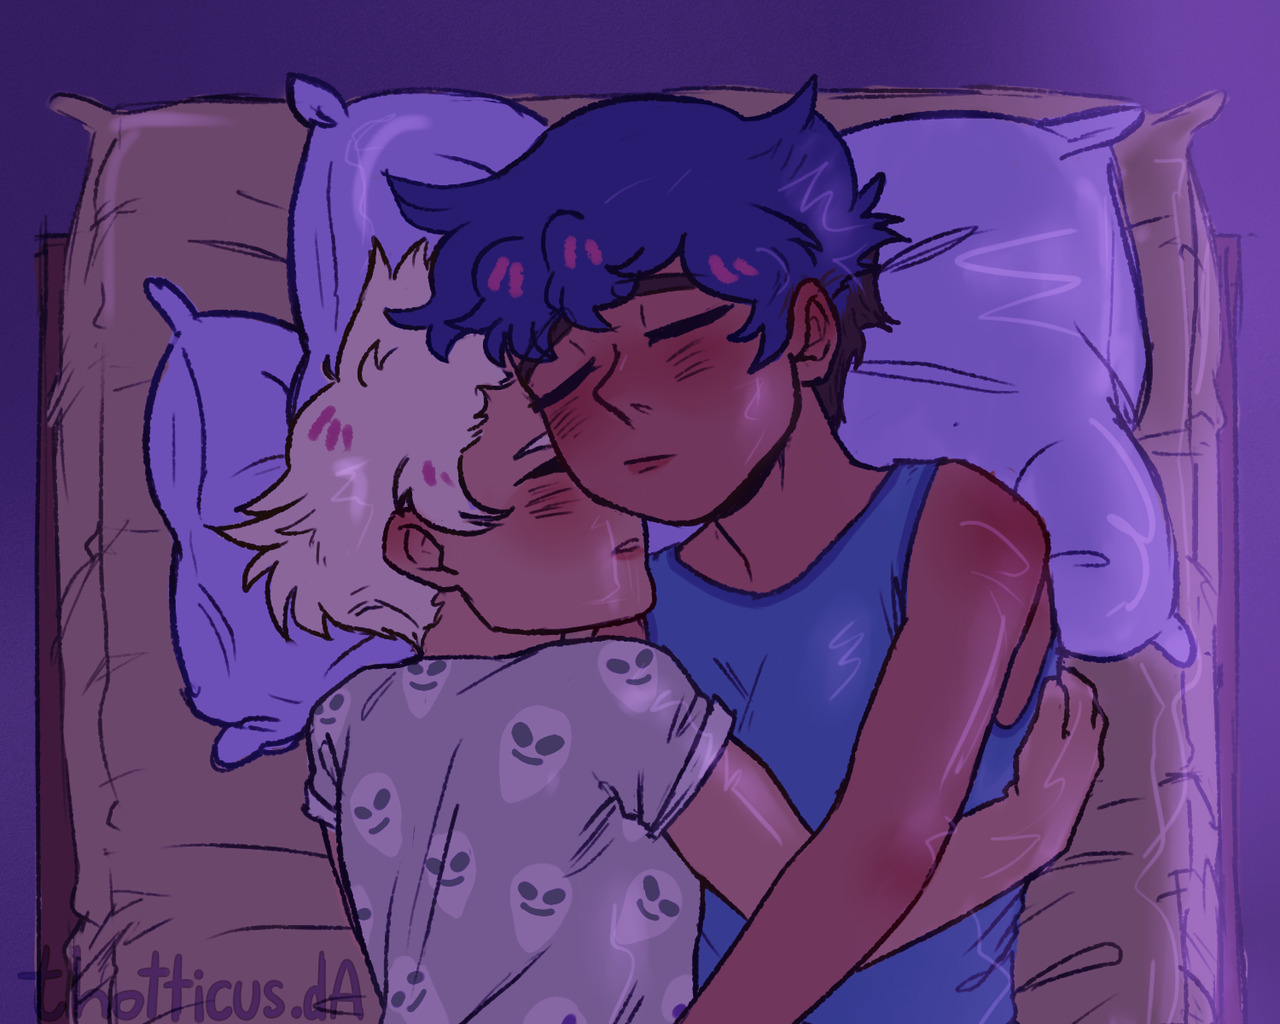 some lapidot cuddles after a watching a camp pining hearts marathon